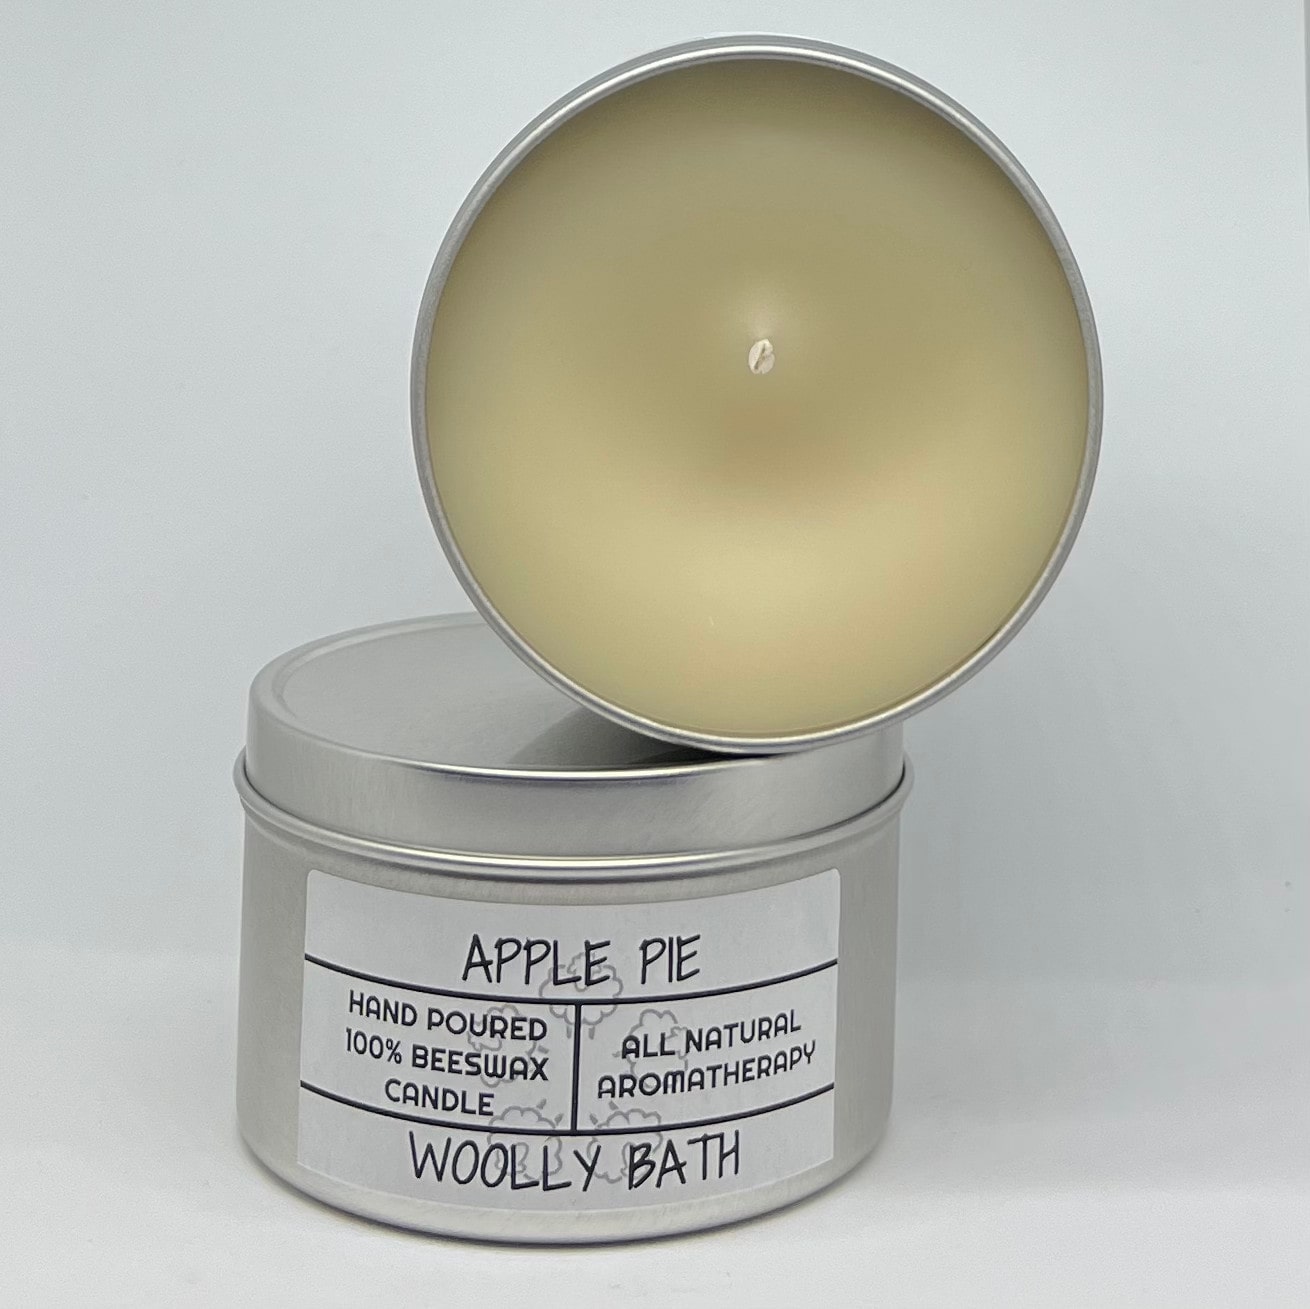 Apple Pie 100% Beeswax Candle - 8OZ